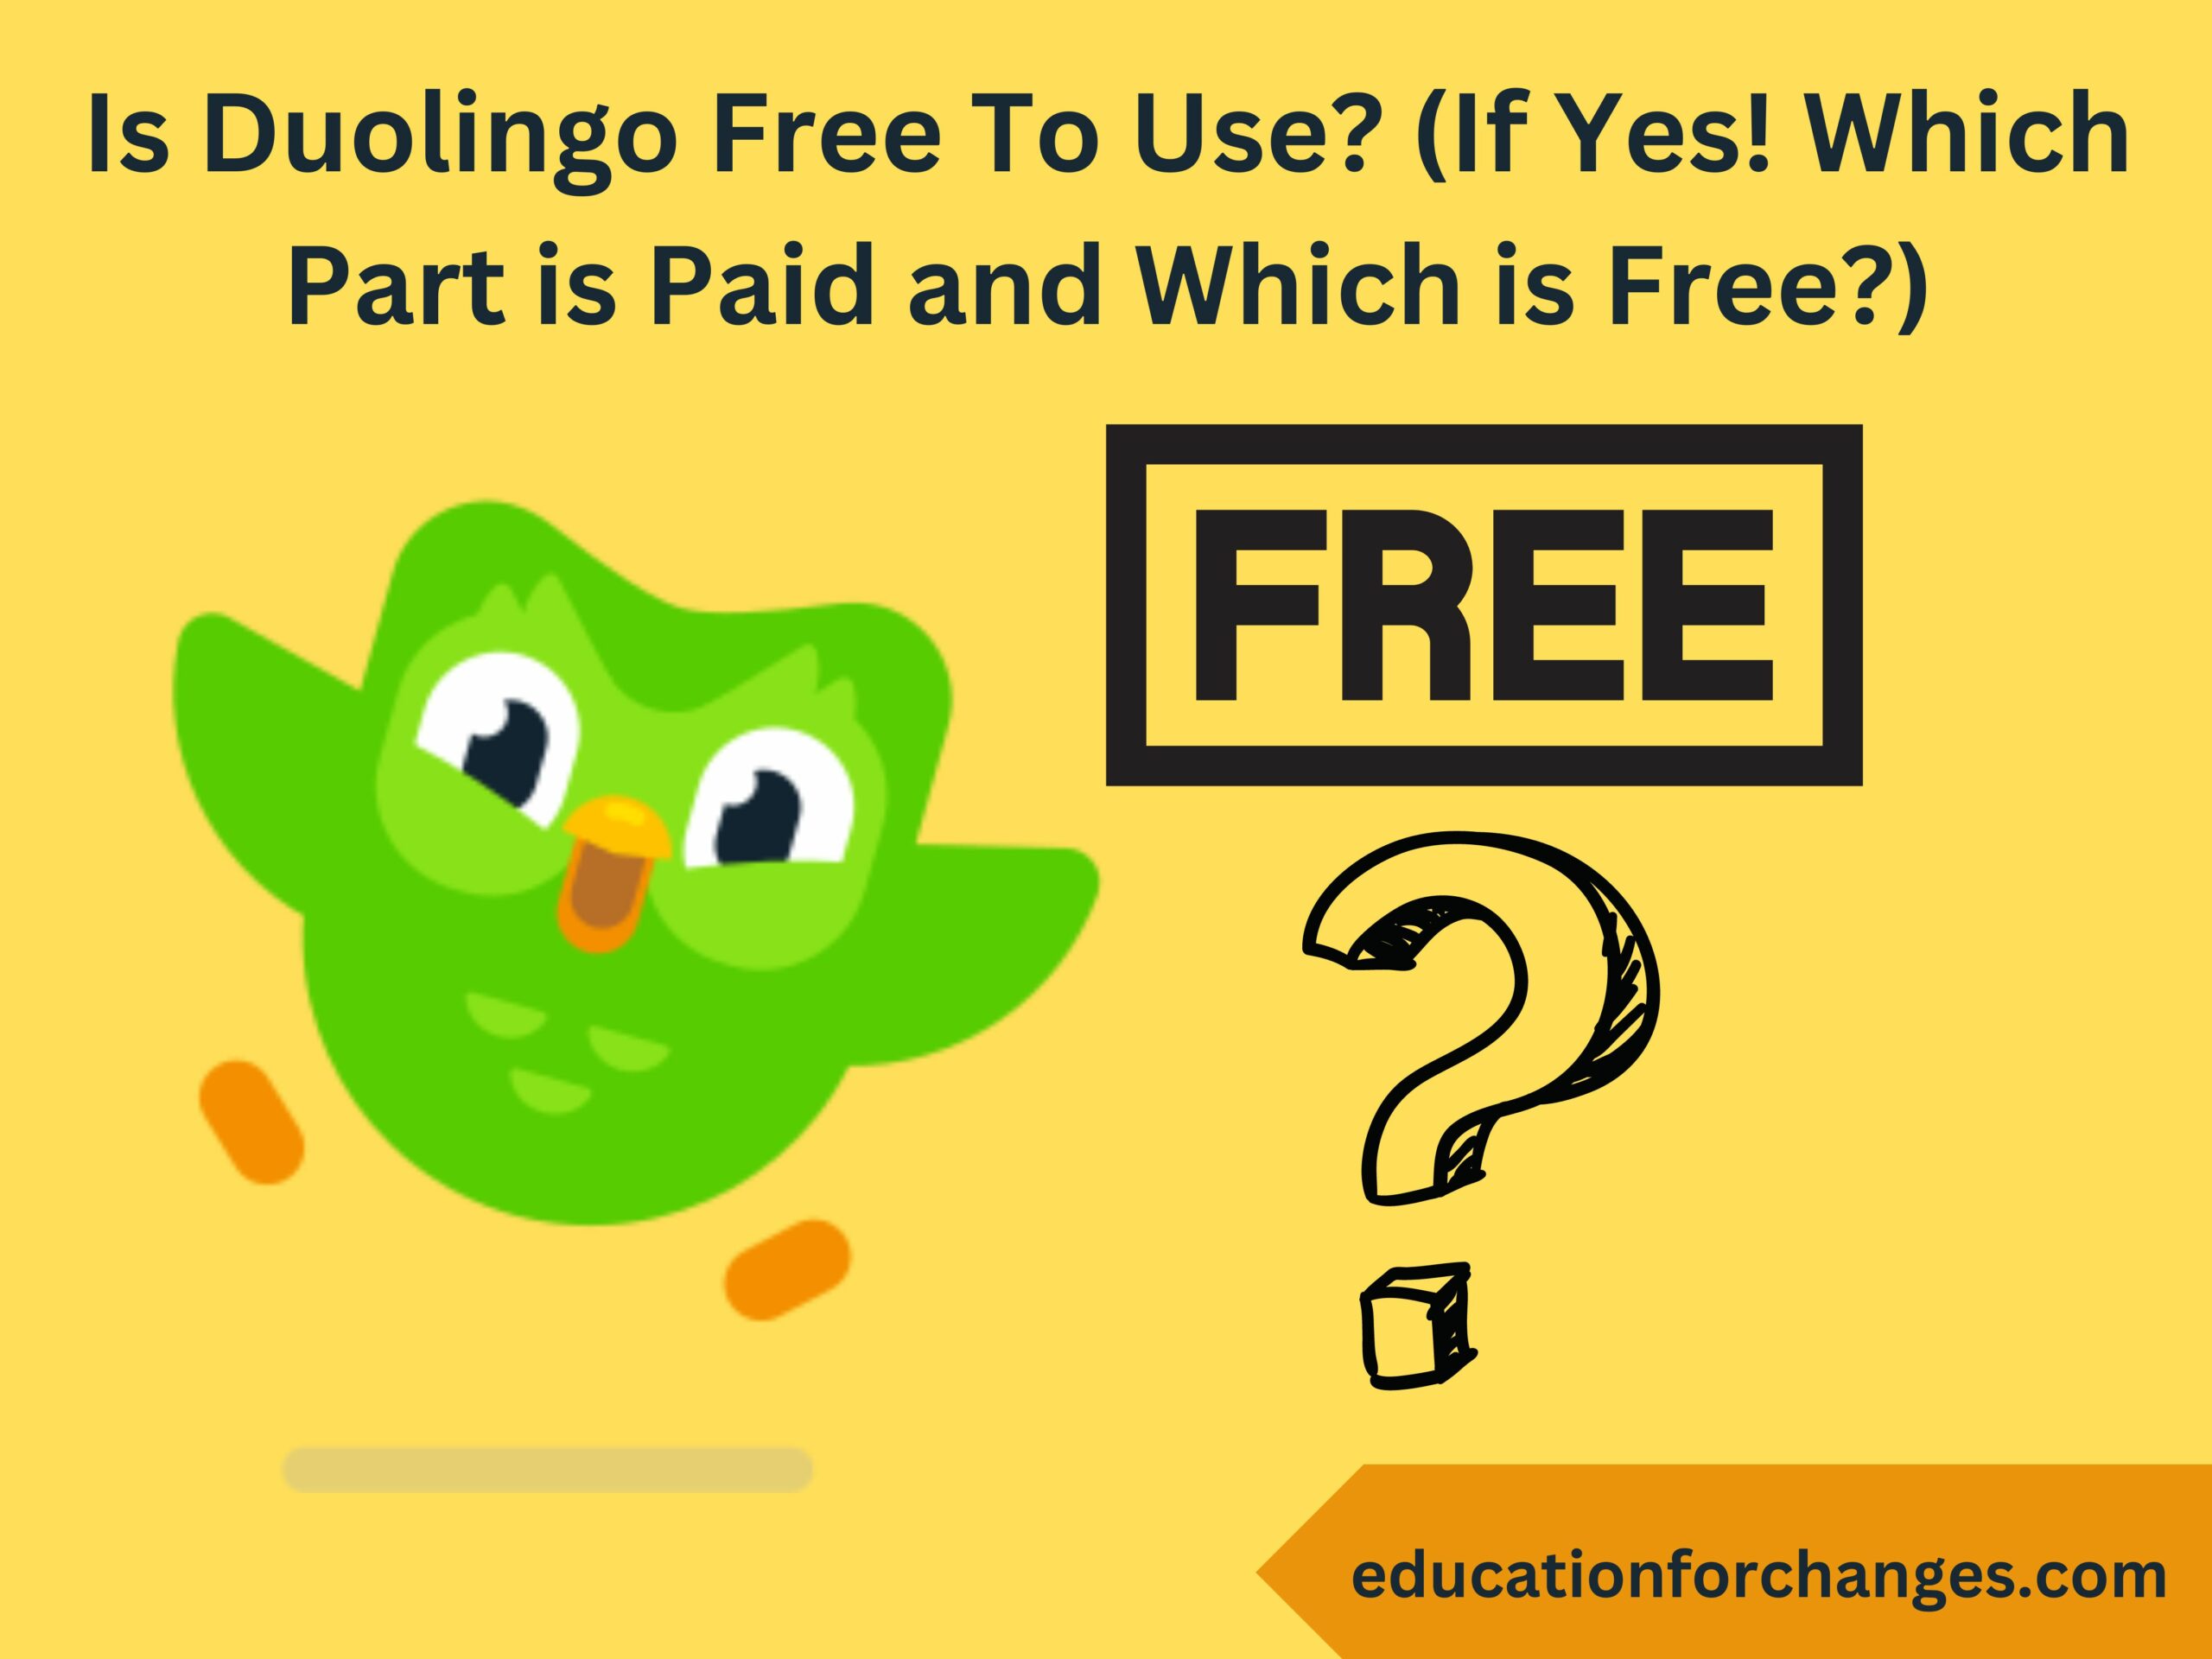 Is Duolingo Free To Use? (If Yes! Which Part is Paid and Which is Free?)